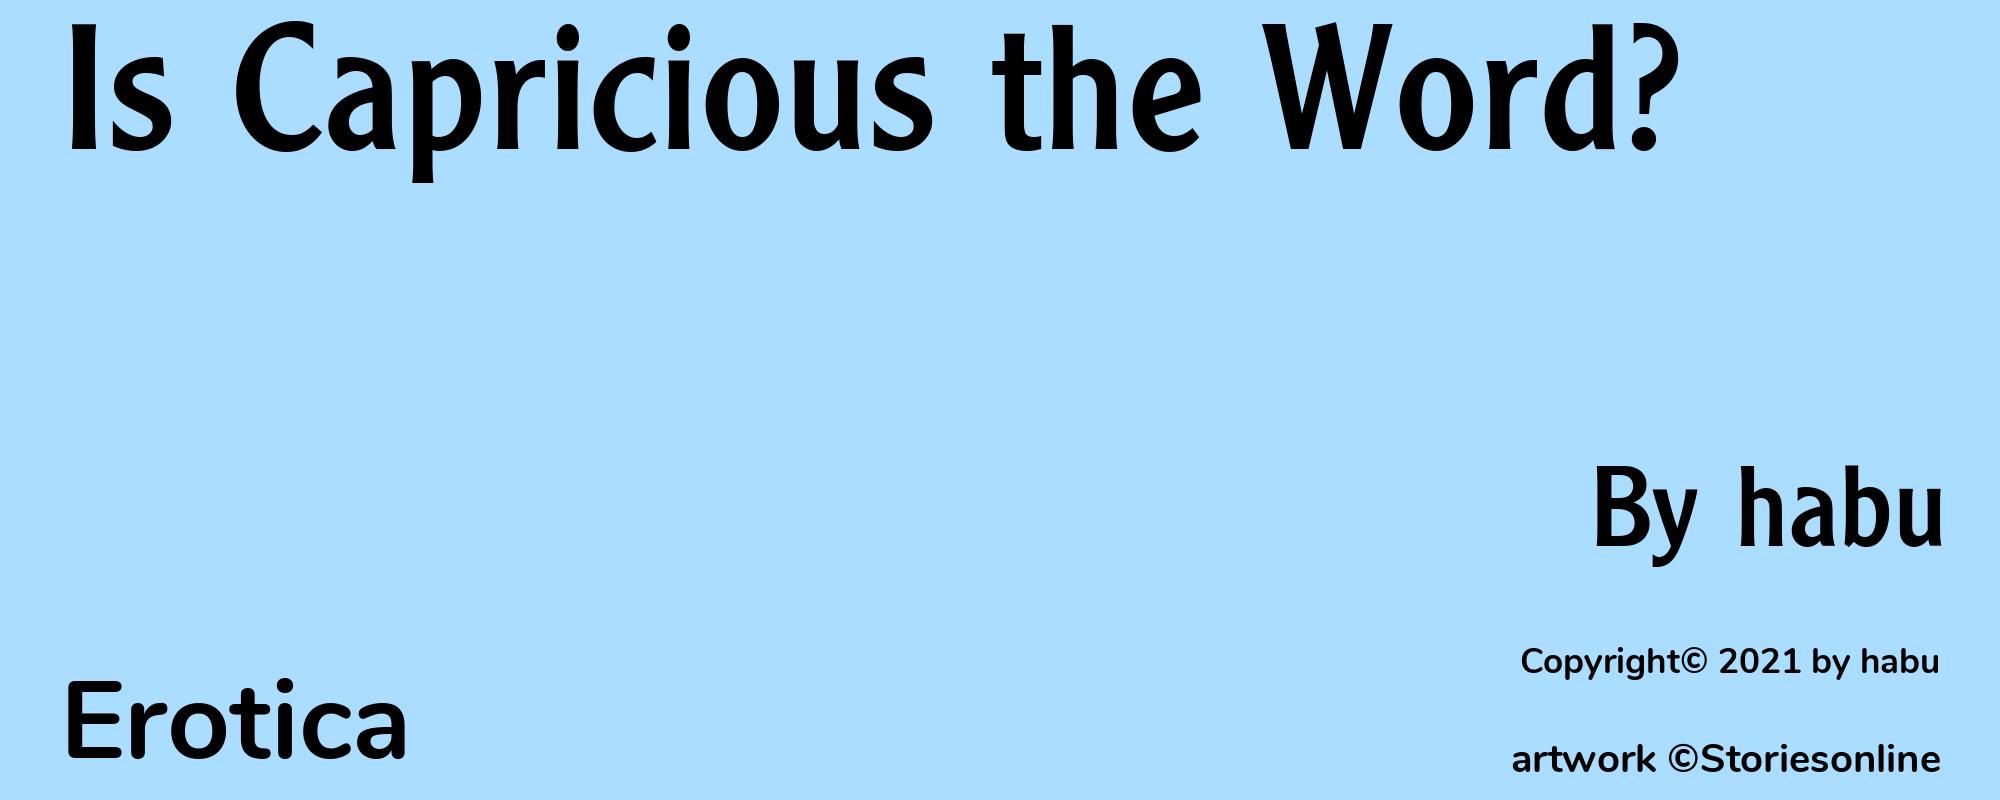 Is Capricious the Word? - Cover